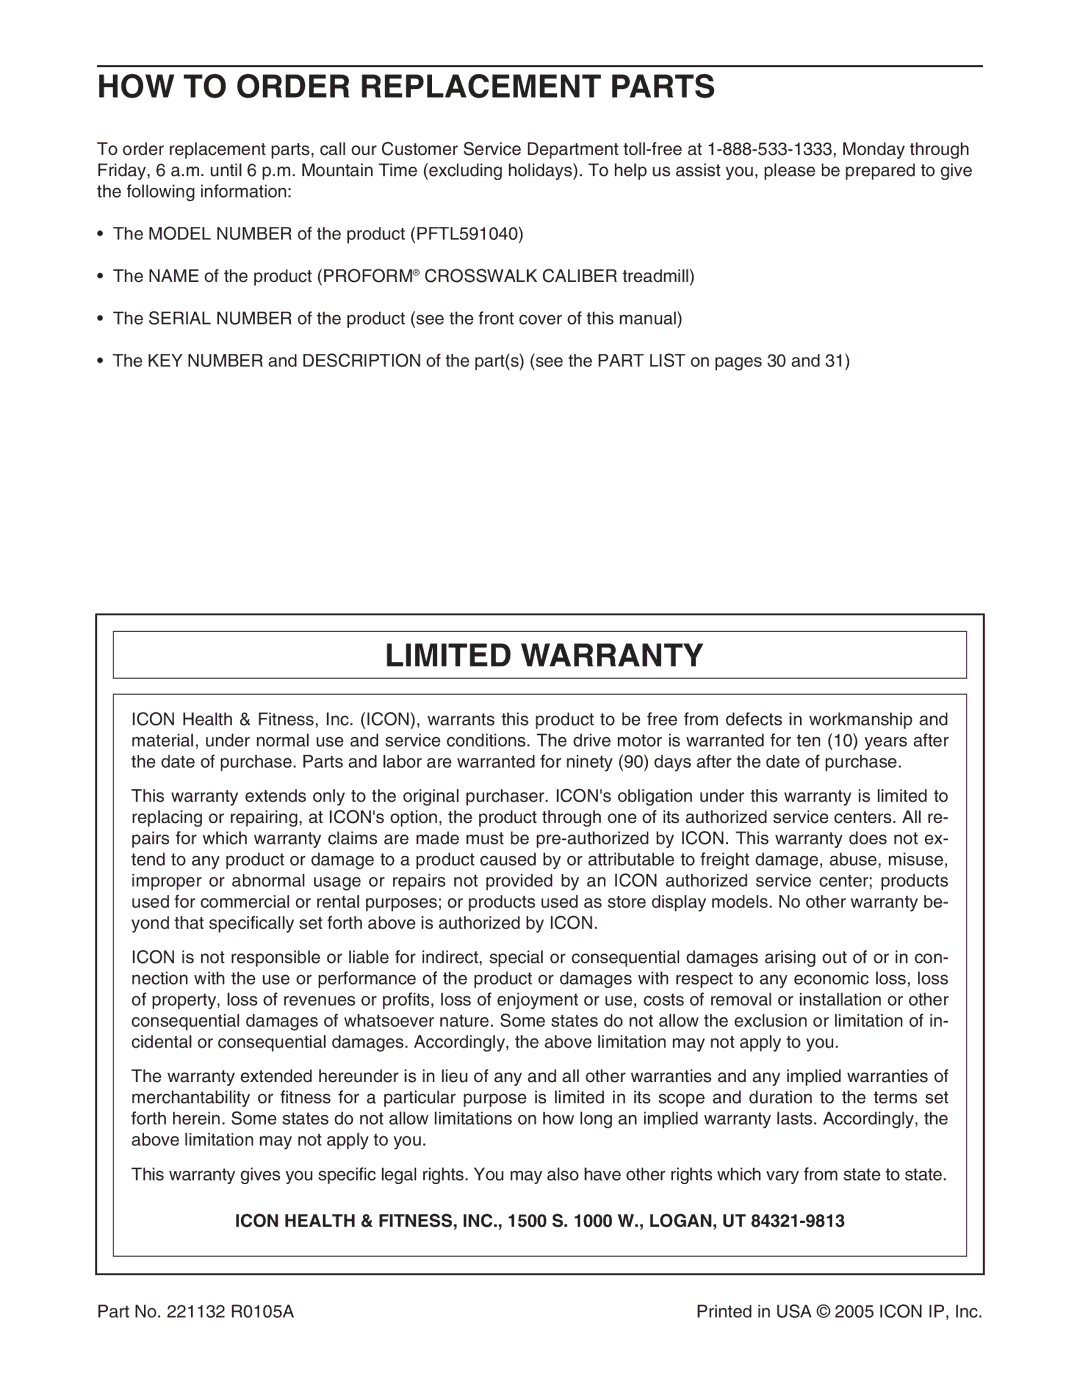 ProForm PFTL591040 HOW to Order Replacement Parts, Limited Warranty, Icon Health & FITNESS, INC., 1500 S W., LOGAN, UT 